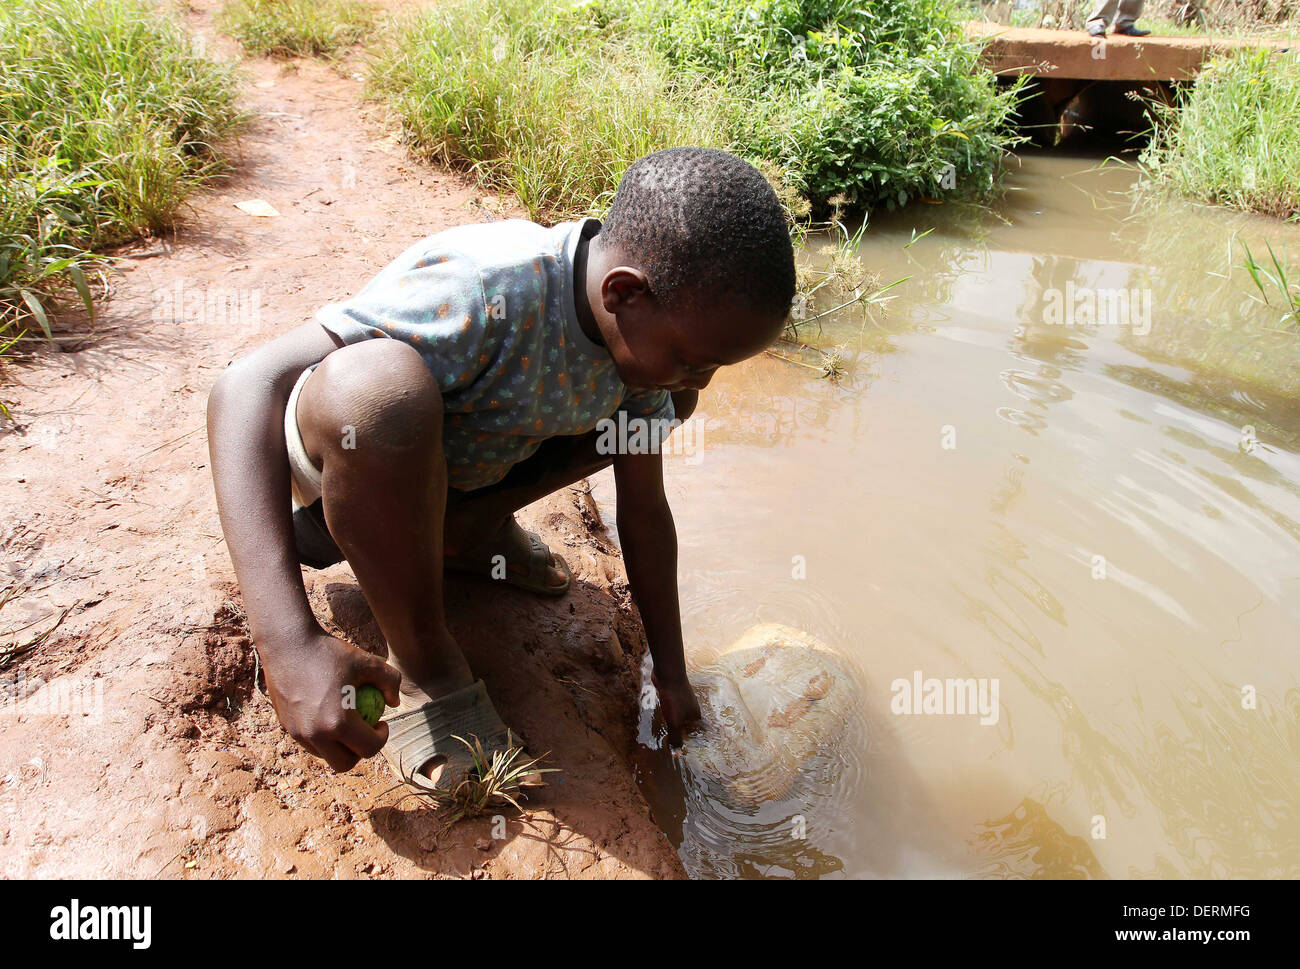 A young boy collects dirty water from a river in the Luwero district of Uganda. Stock Photo